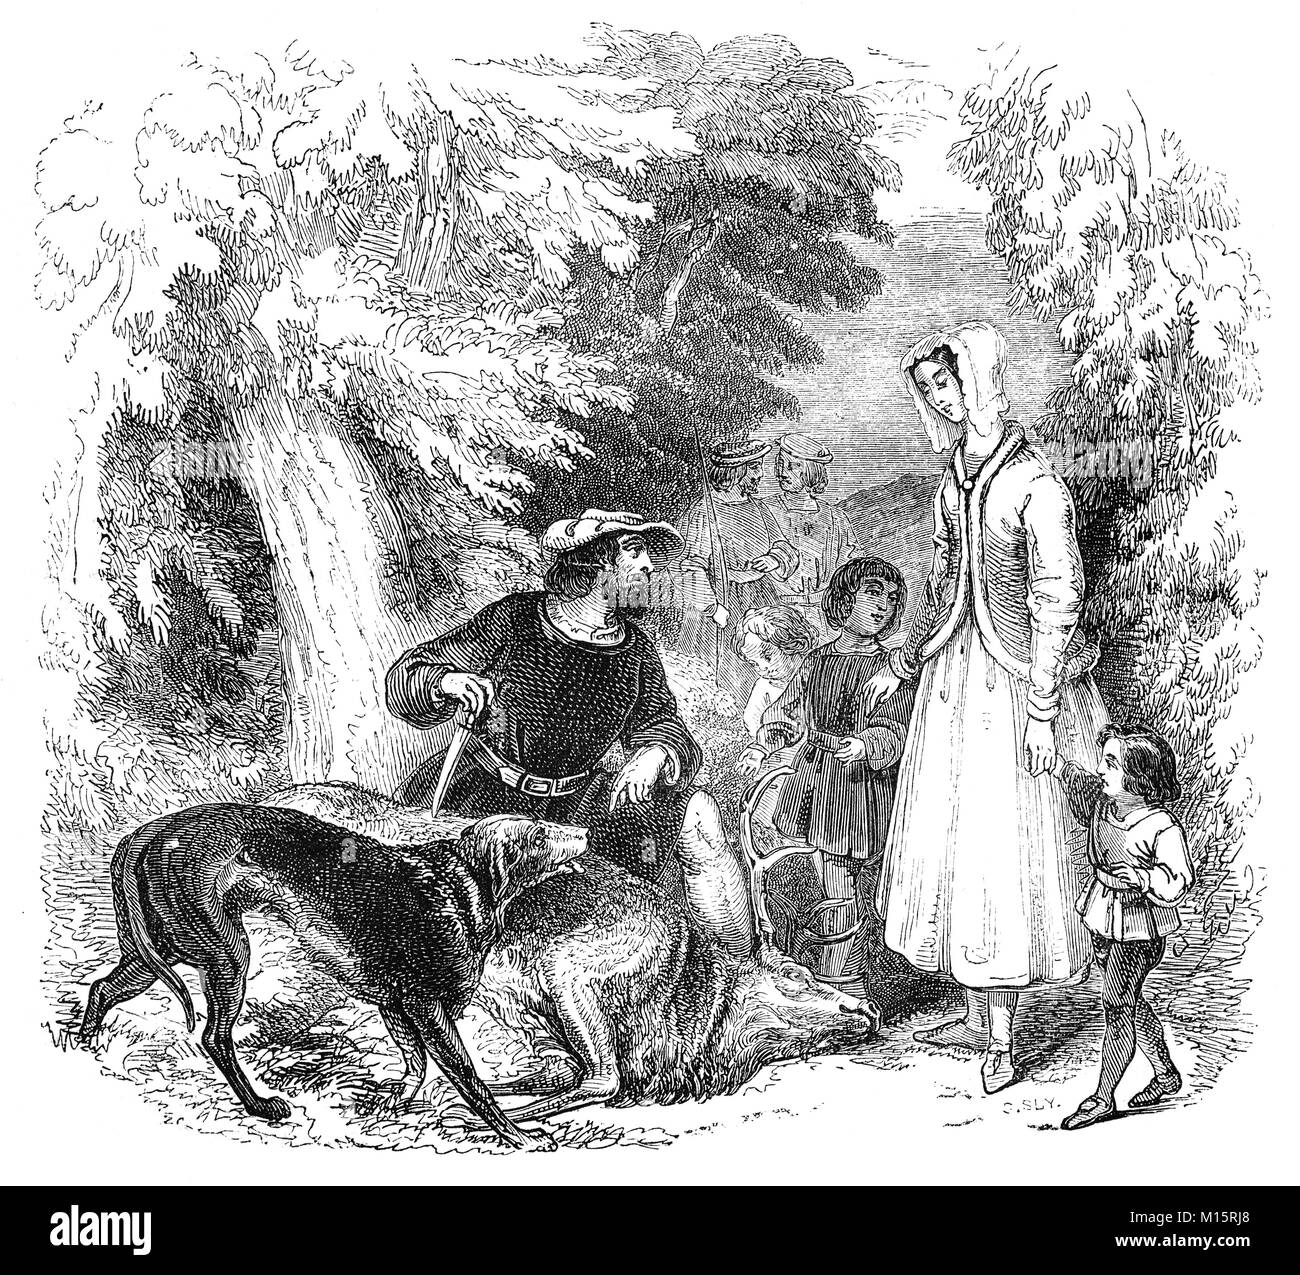 William of Cloudsley with his family and a recently killed deer. He was famed as an archer who shot an arrow through an apple on his son's head at six score paces, a feat also ascribed to William Tell. He lived in Inglewood Forest near Carlisle in Cumbria with other 14th Century  outlaw figures similar to Robin Hood. England. Stock Photo